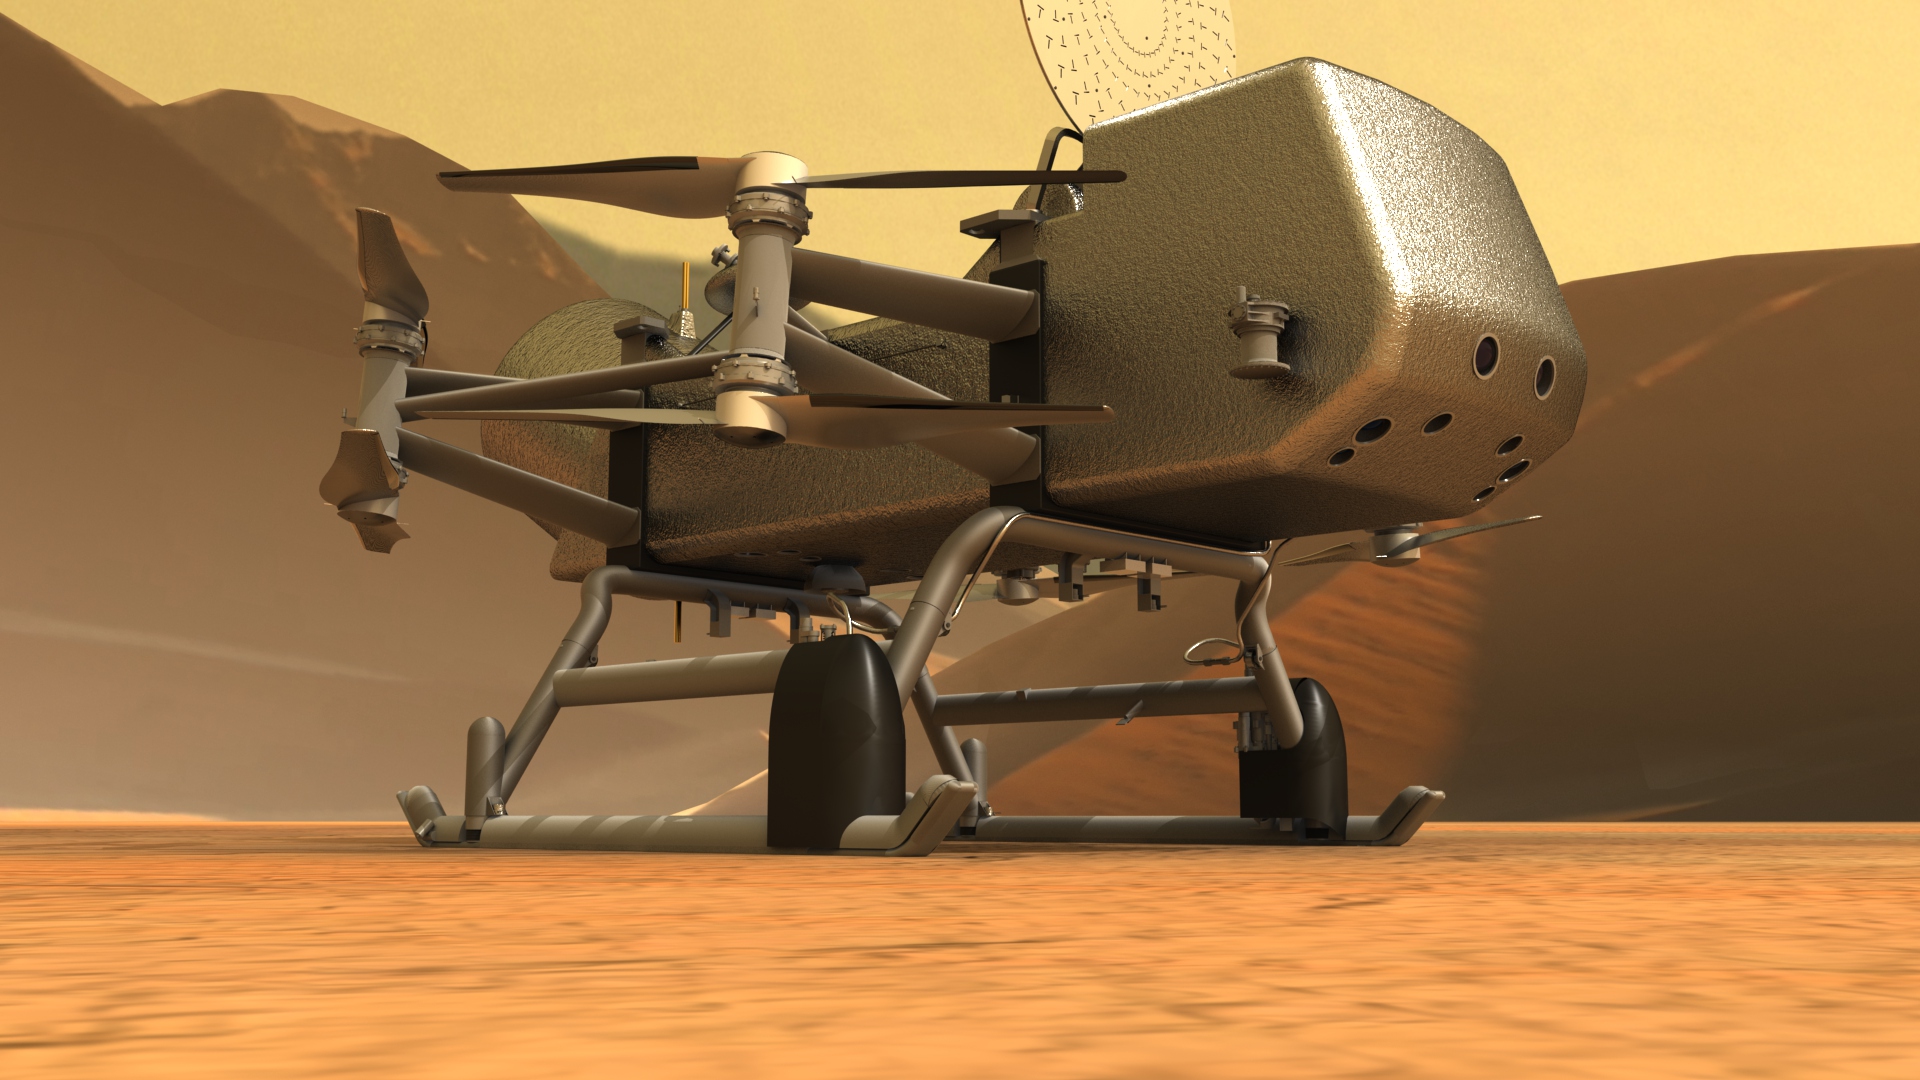 a small helicopter on the surface of a yellowish, dusty moon